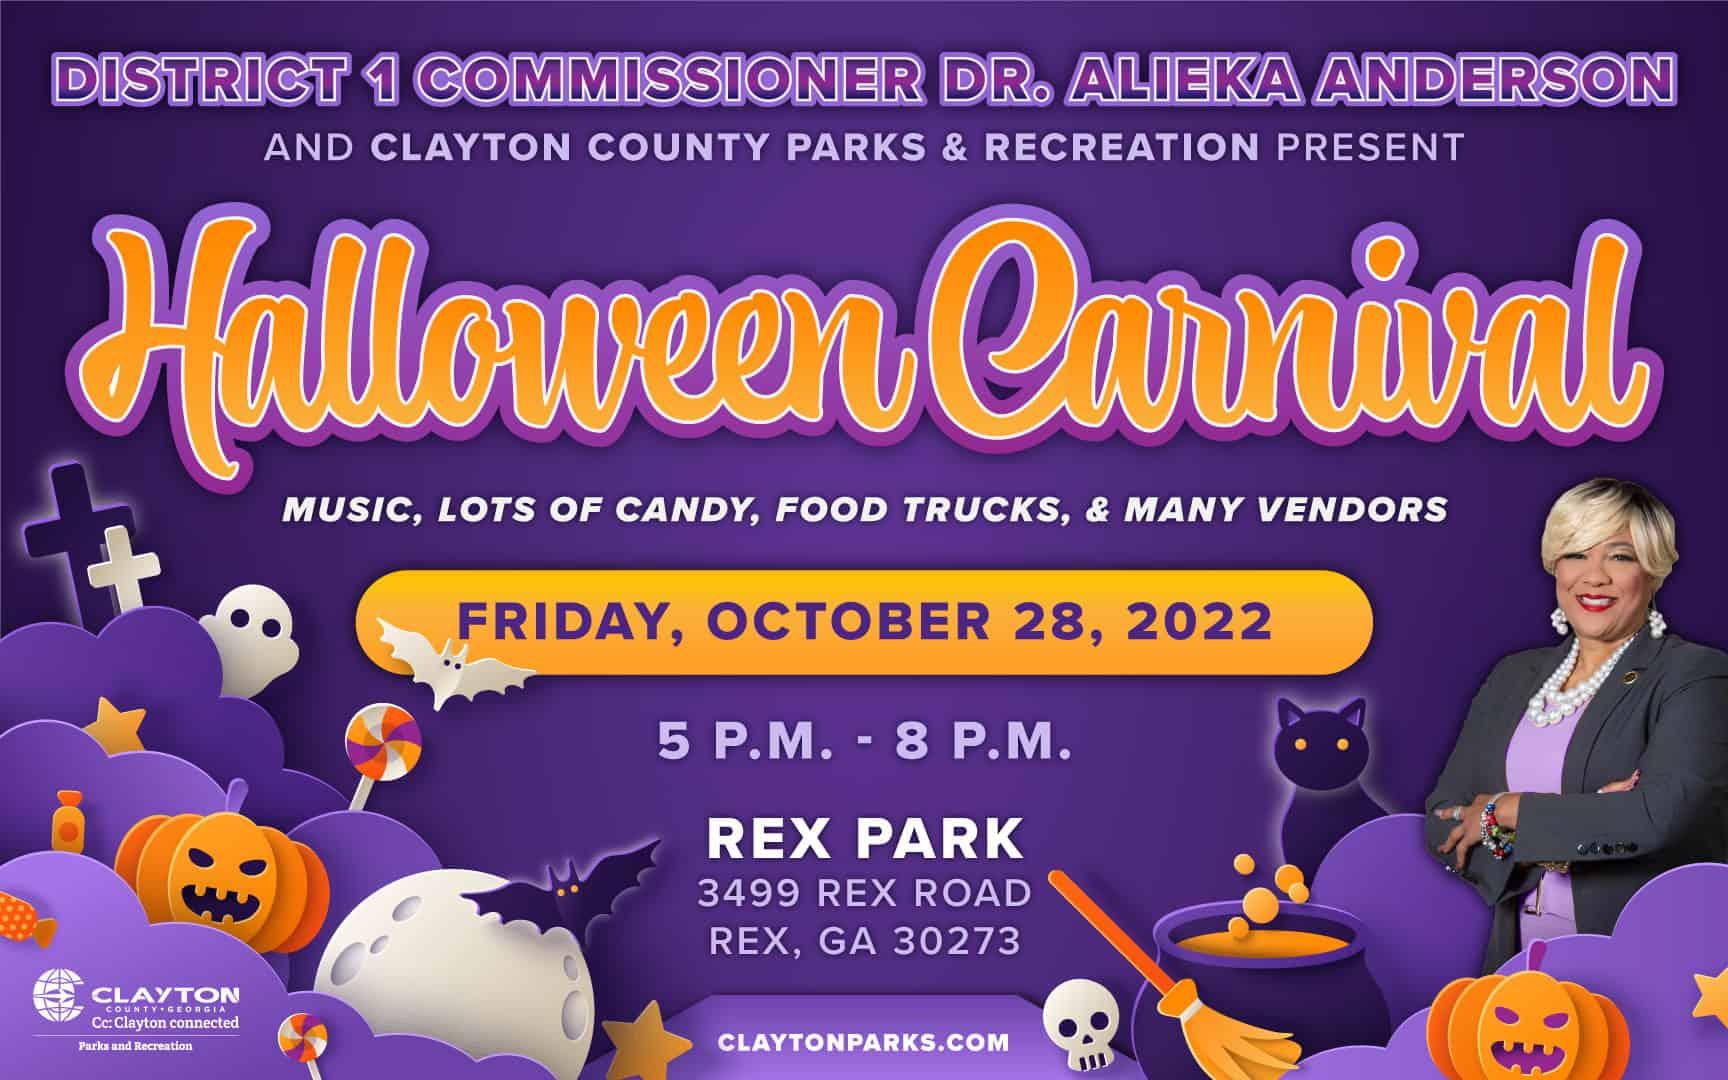 Advance Tickets for Halloween Carnival – Brentwood PTA